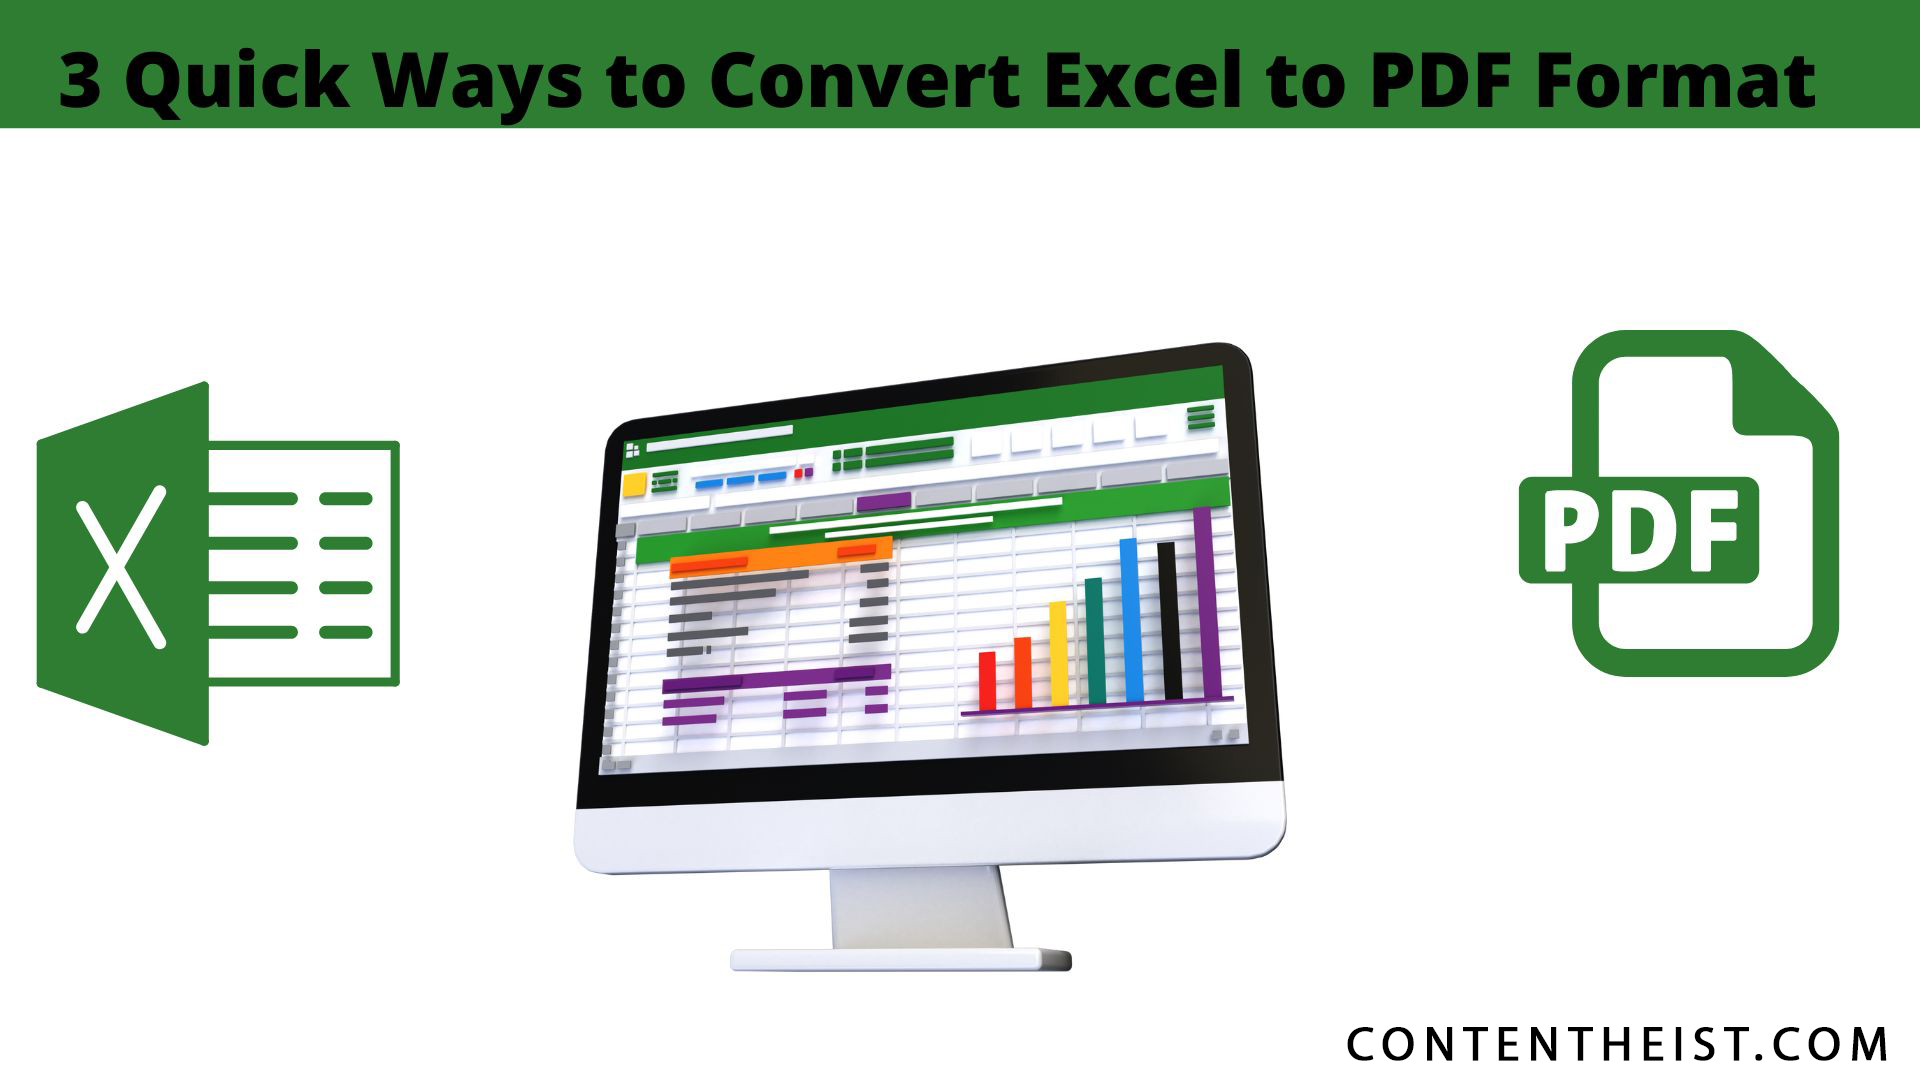 3 Quick Ways to Convert Excel to PDF Format